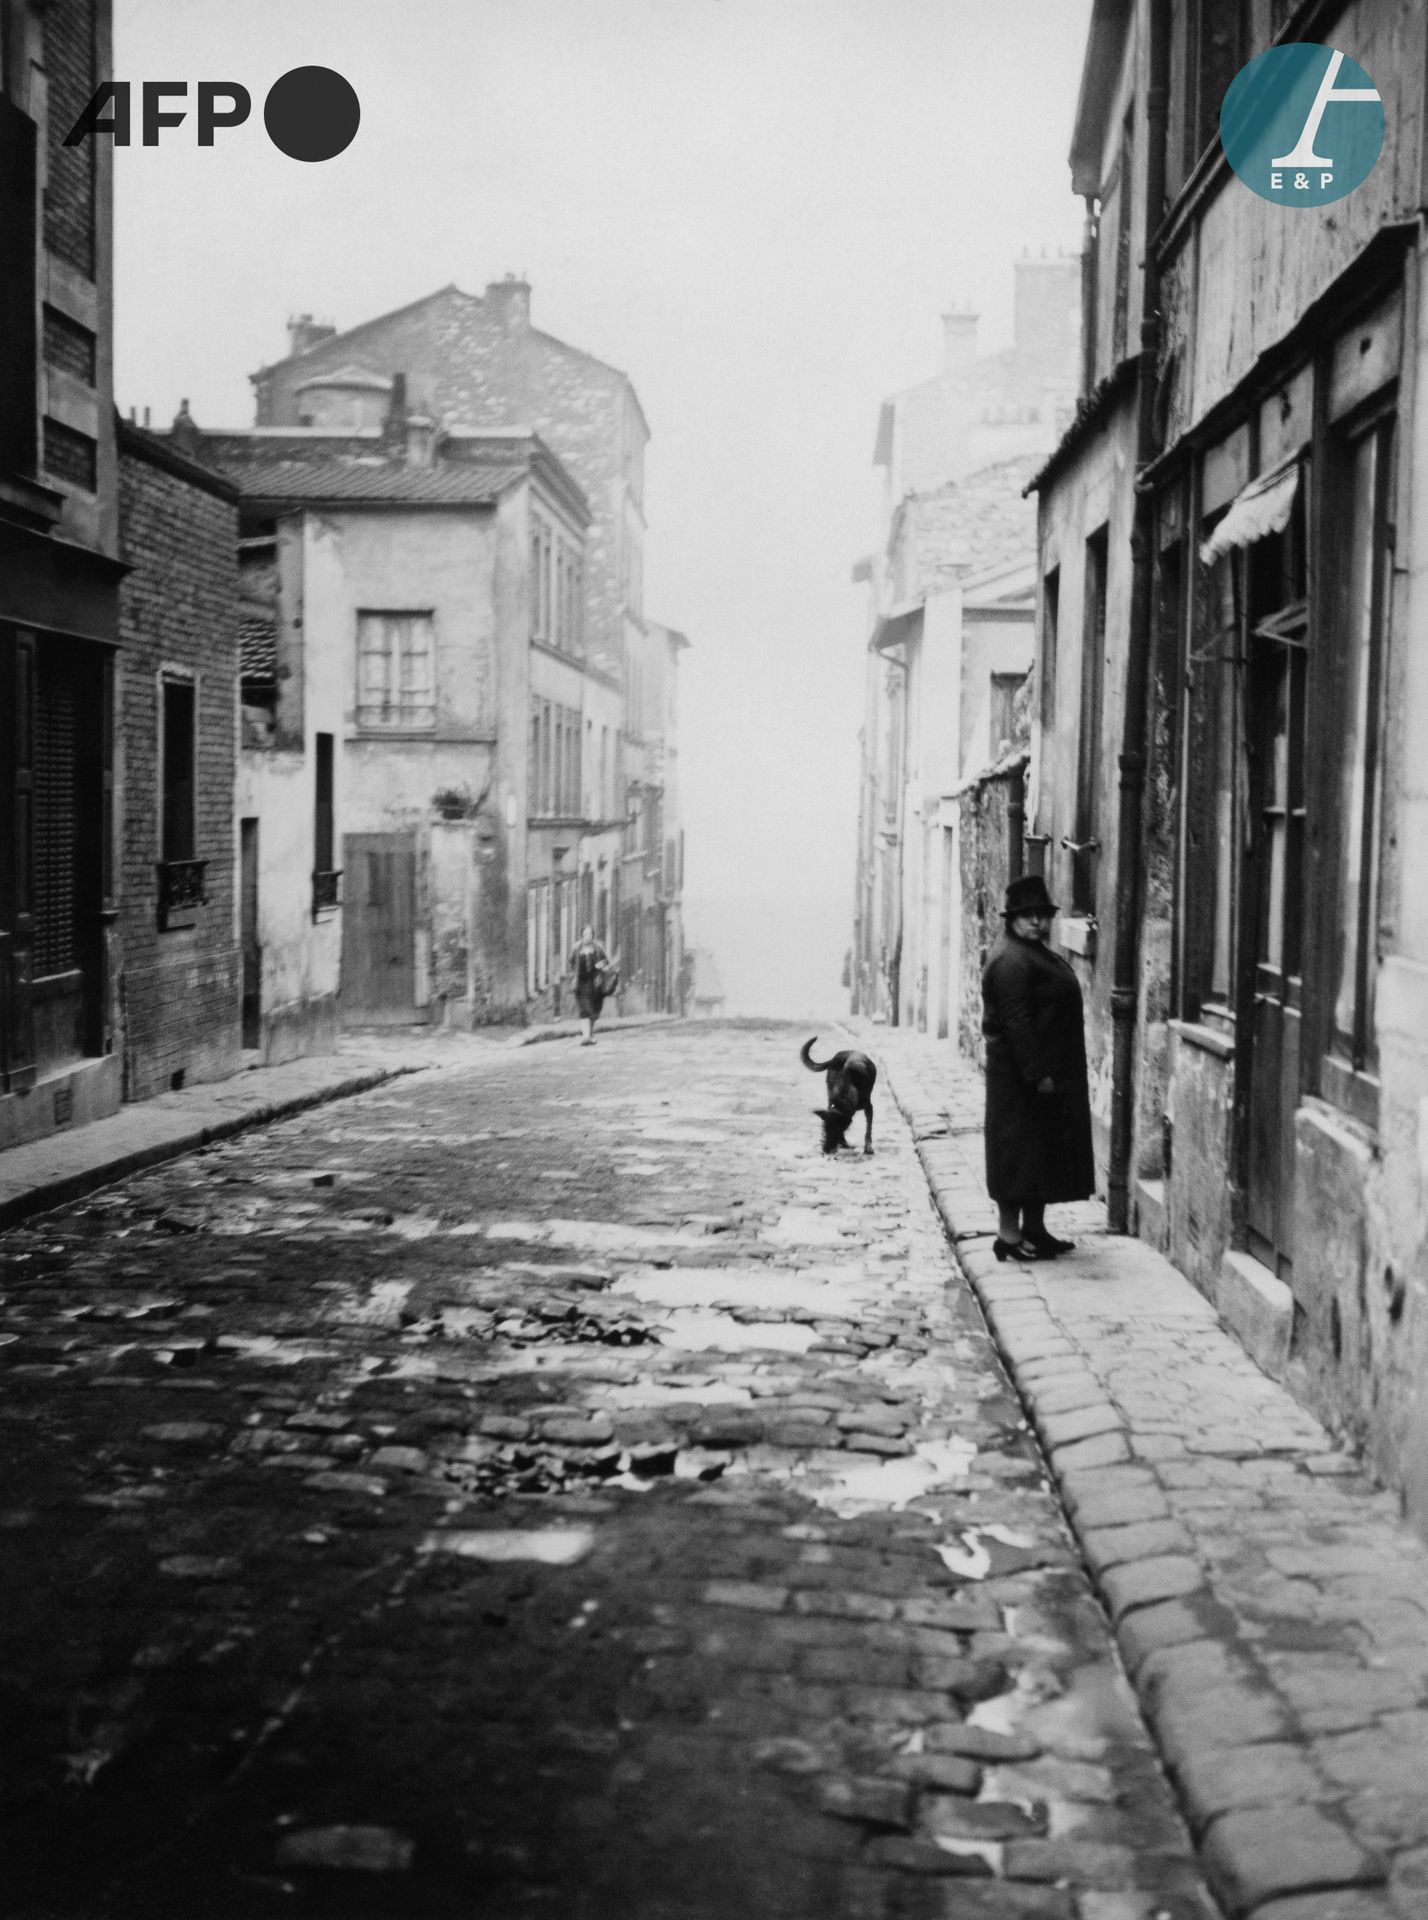 Null AFP

A woman looks at the photographer on Rue Alphand, a cobbled street in &hellip;